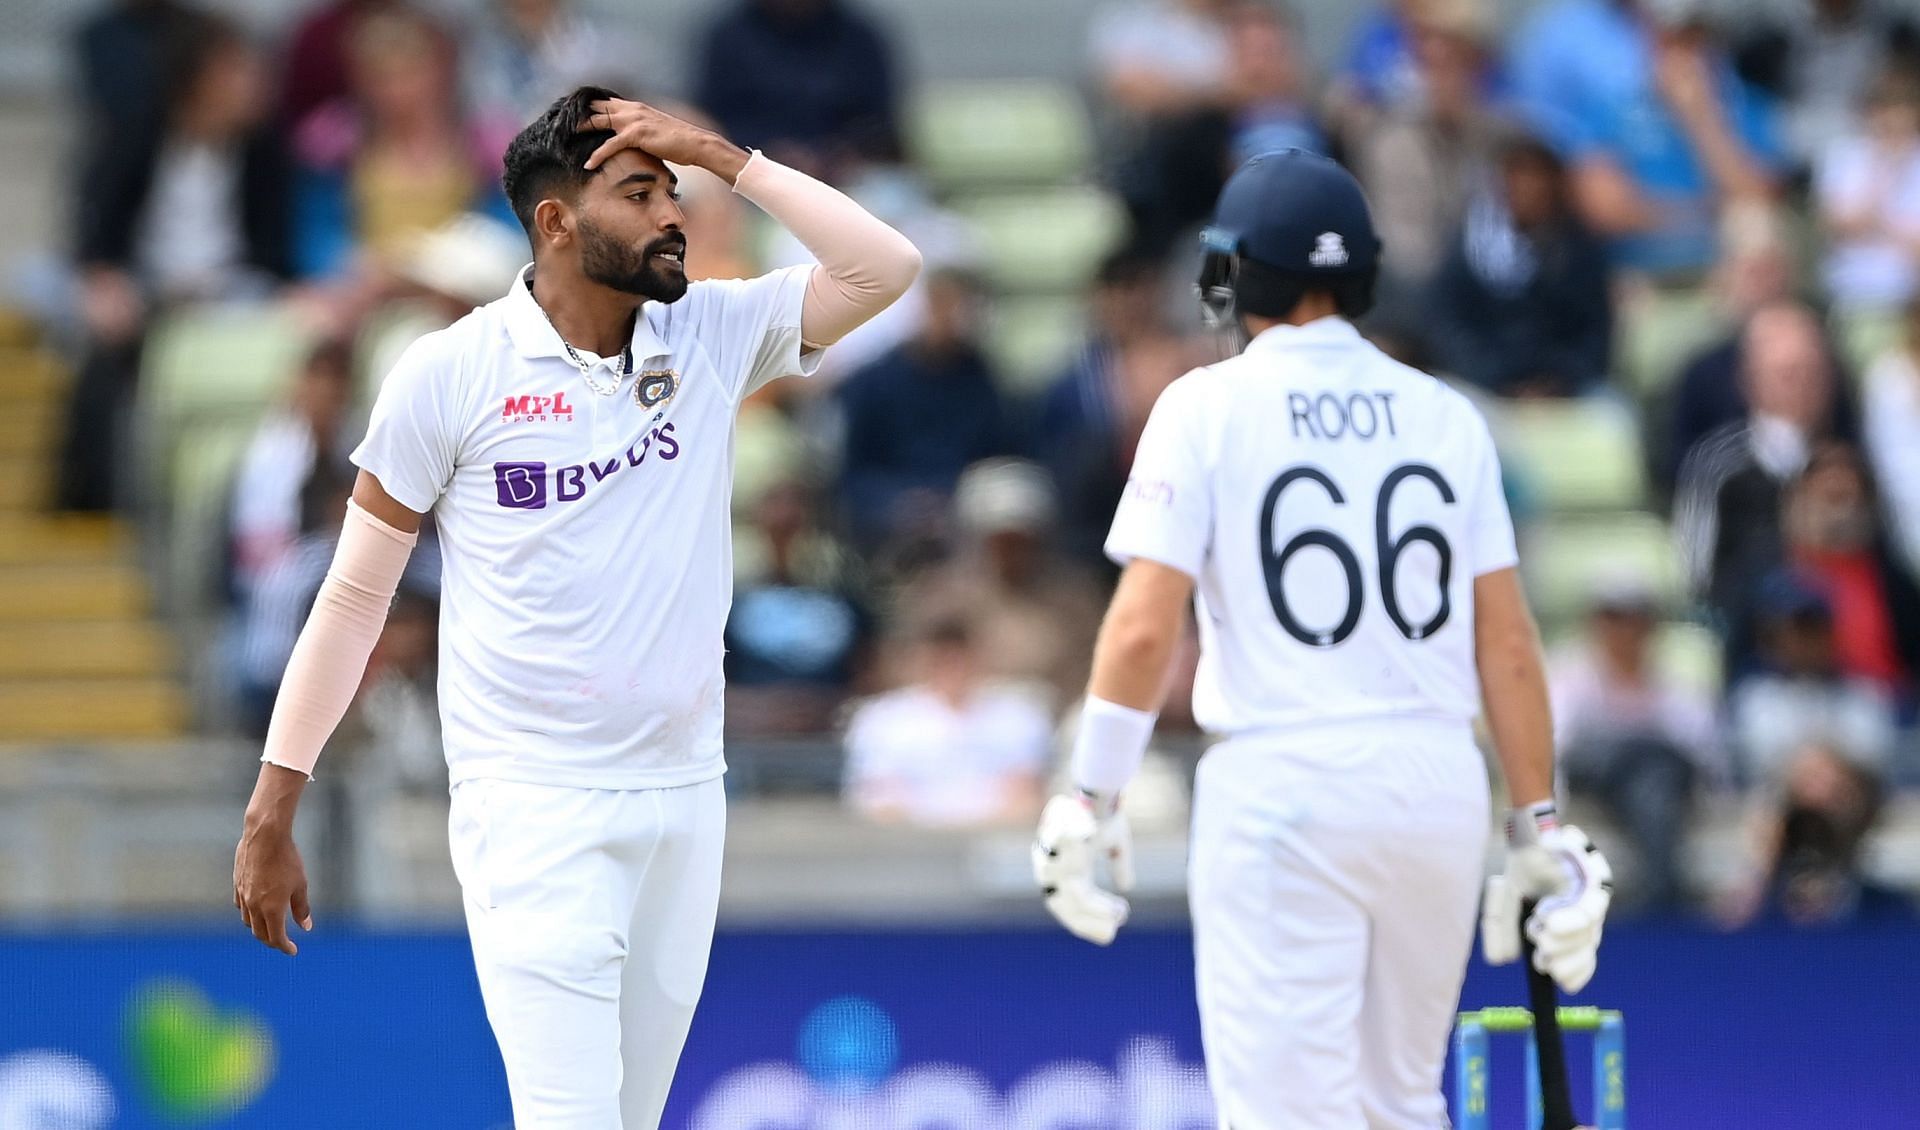 England v India - Fifth LV= Insurance Test Match: Day Five